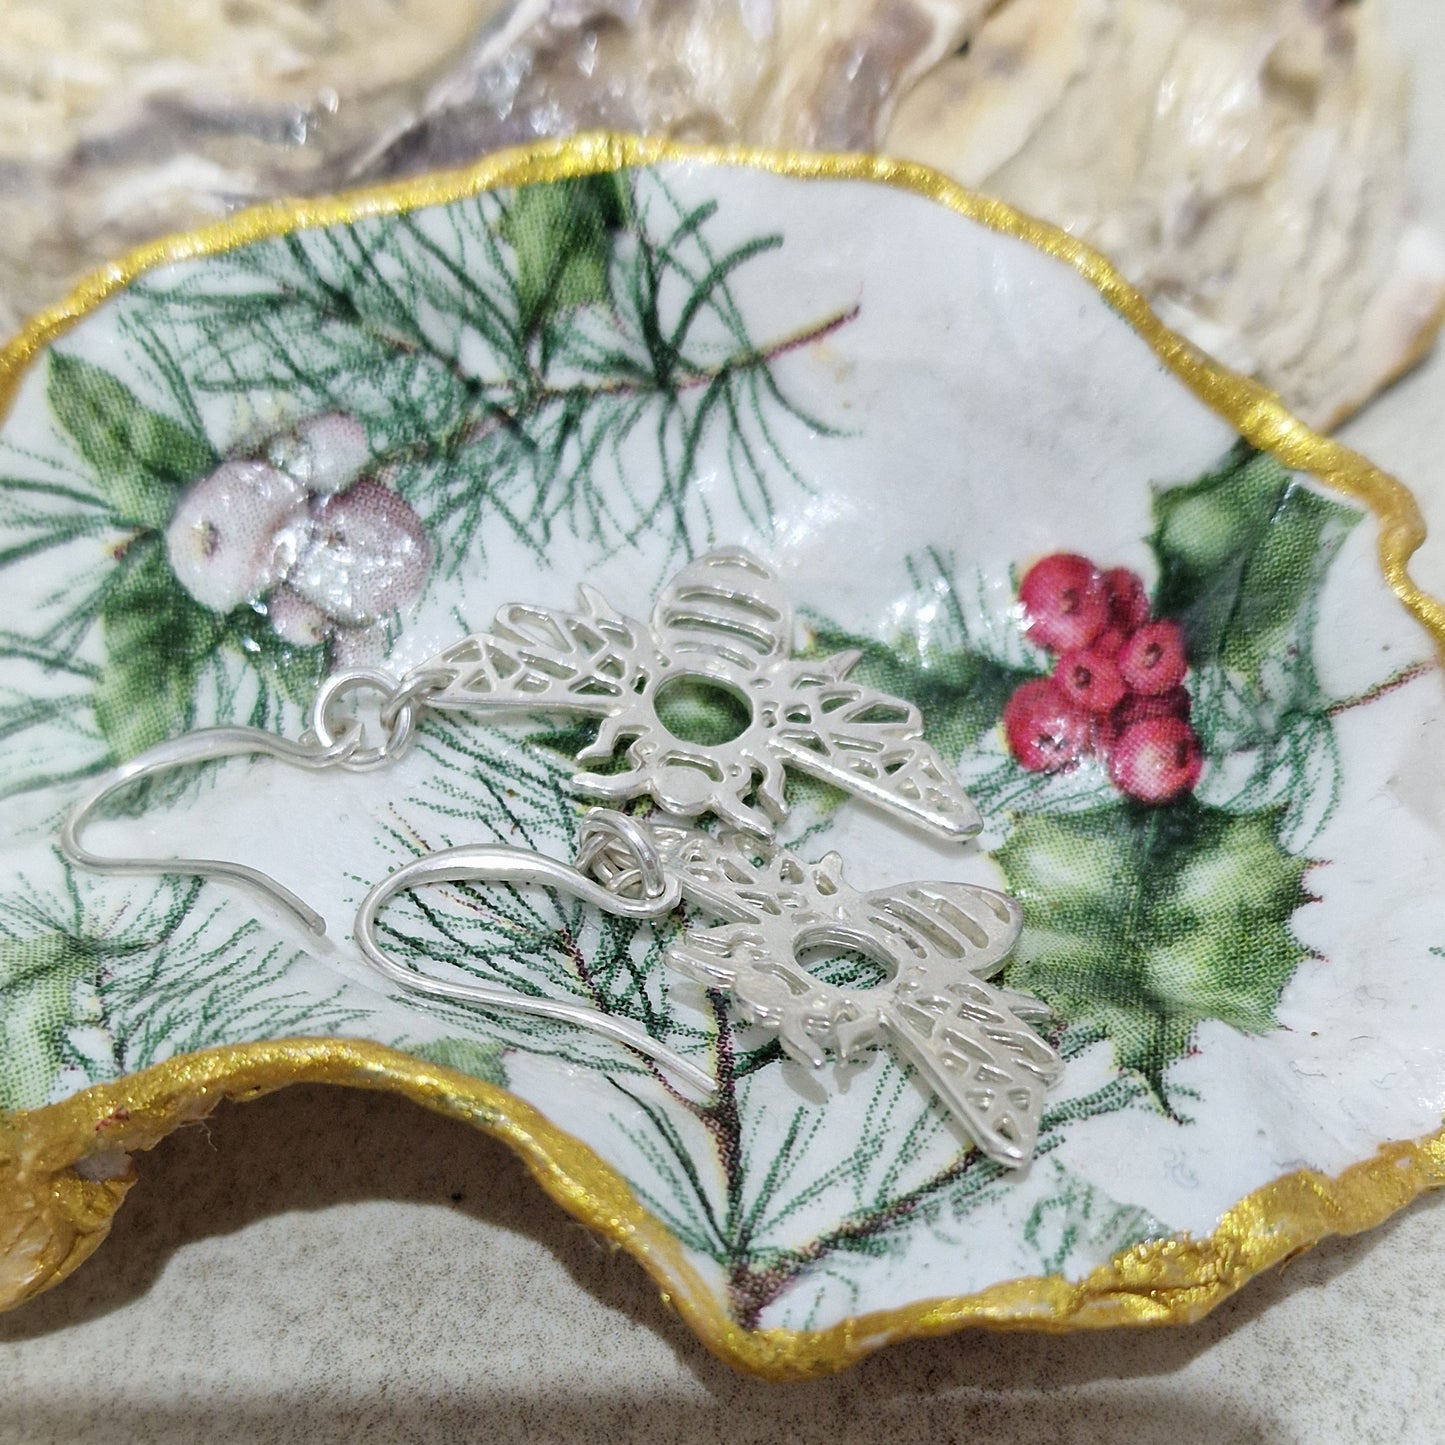 Christmas Holly Berry Oyster Shell Decorative Trinket Dish 8cm